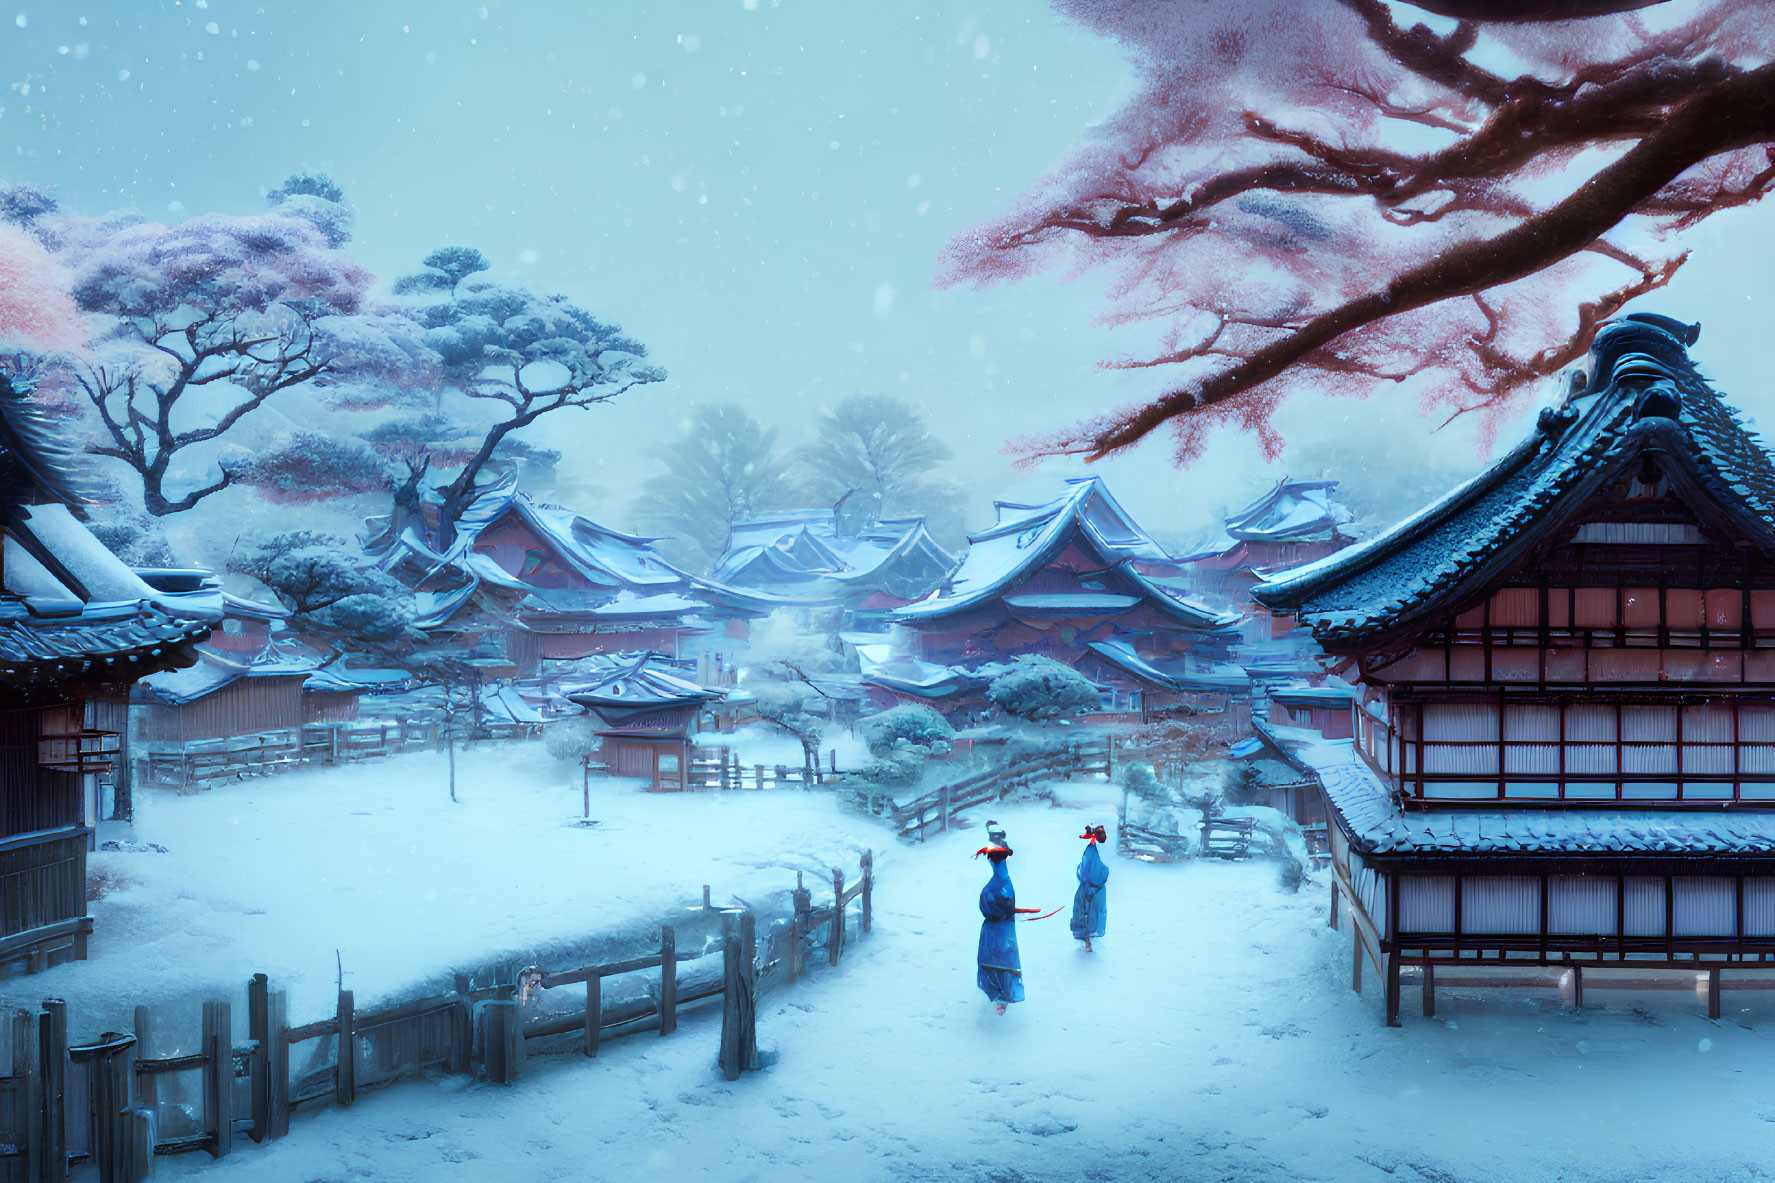 Snow-covered East Asian village with cherry blossoms and historical figures.